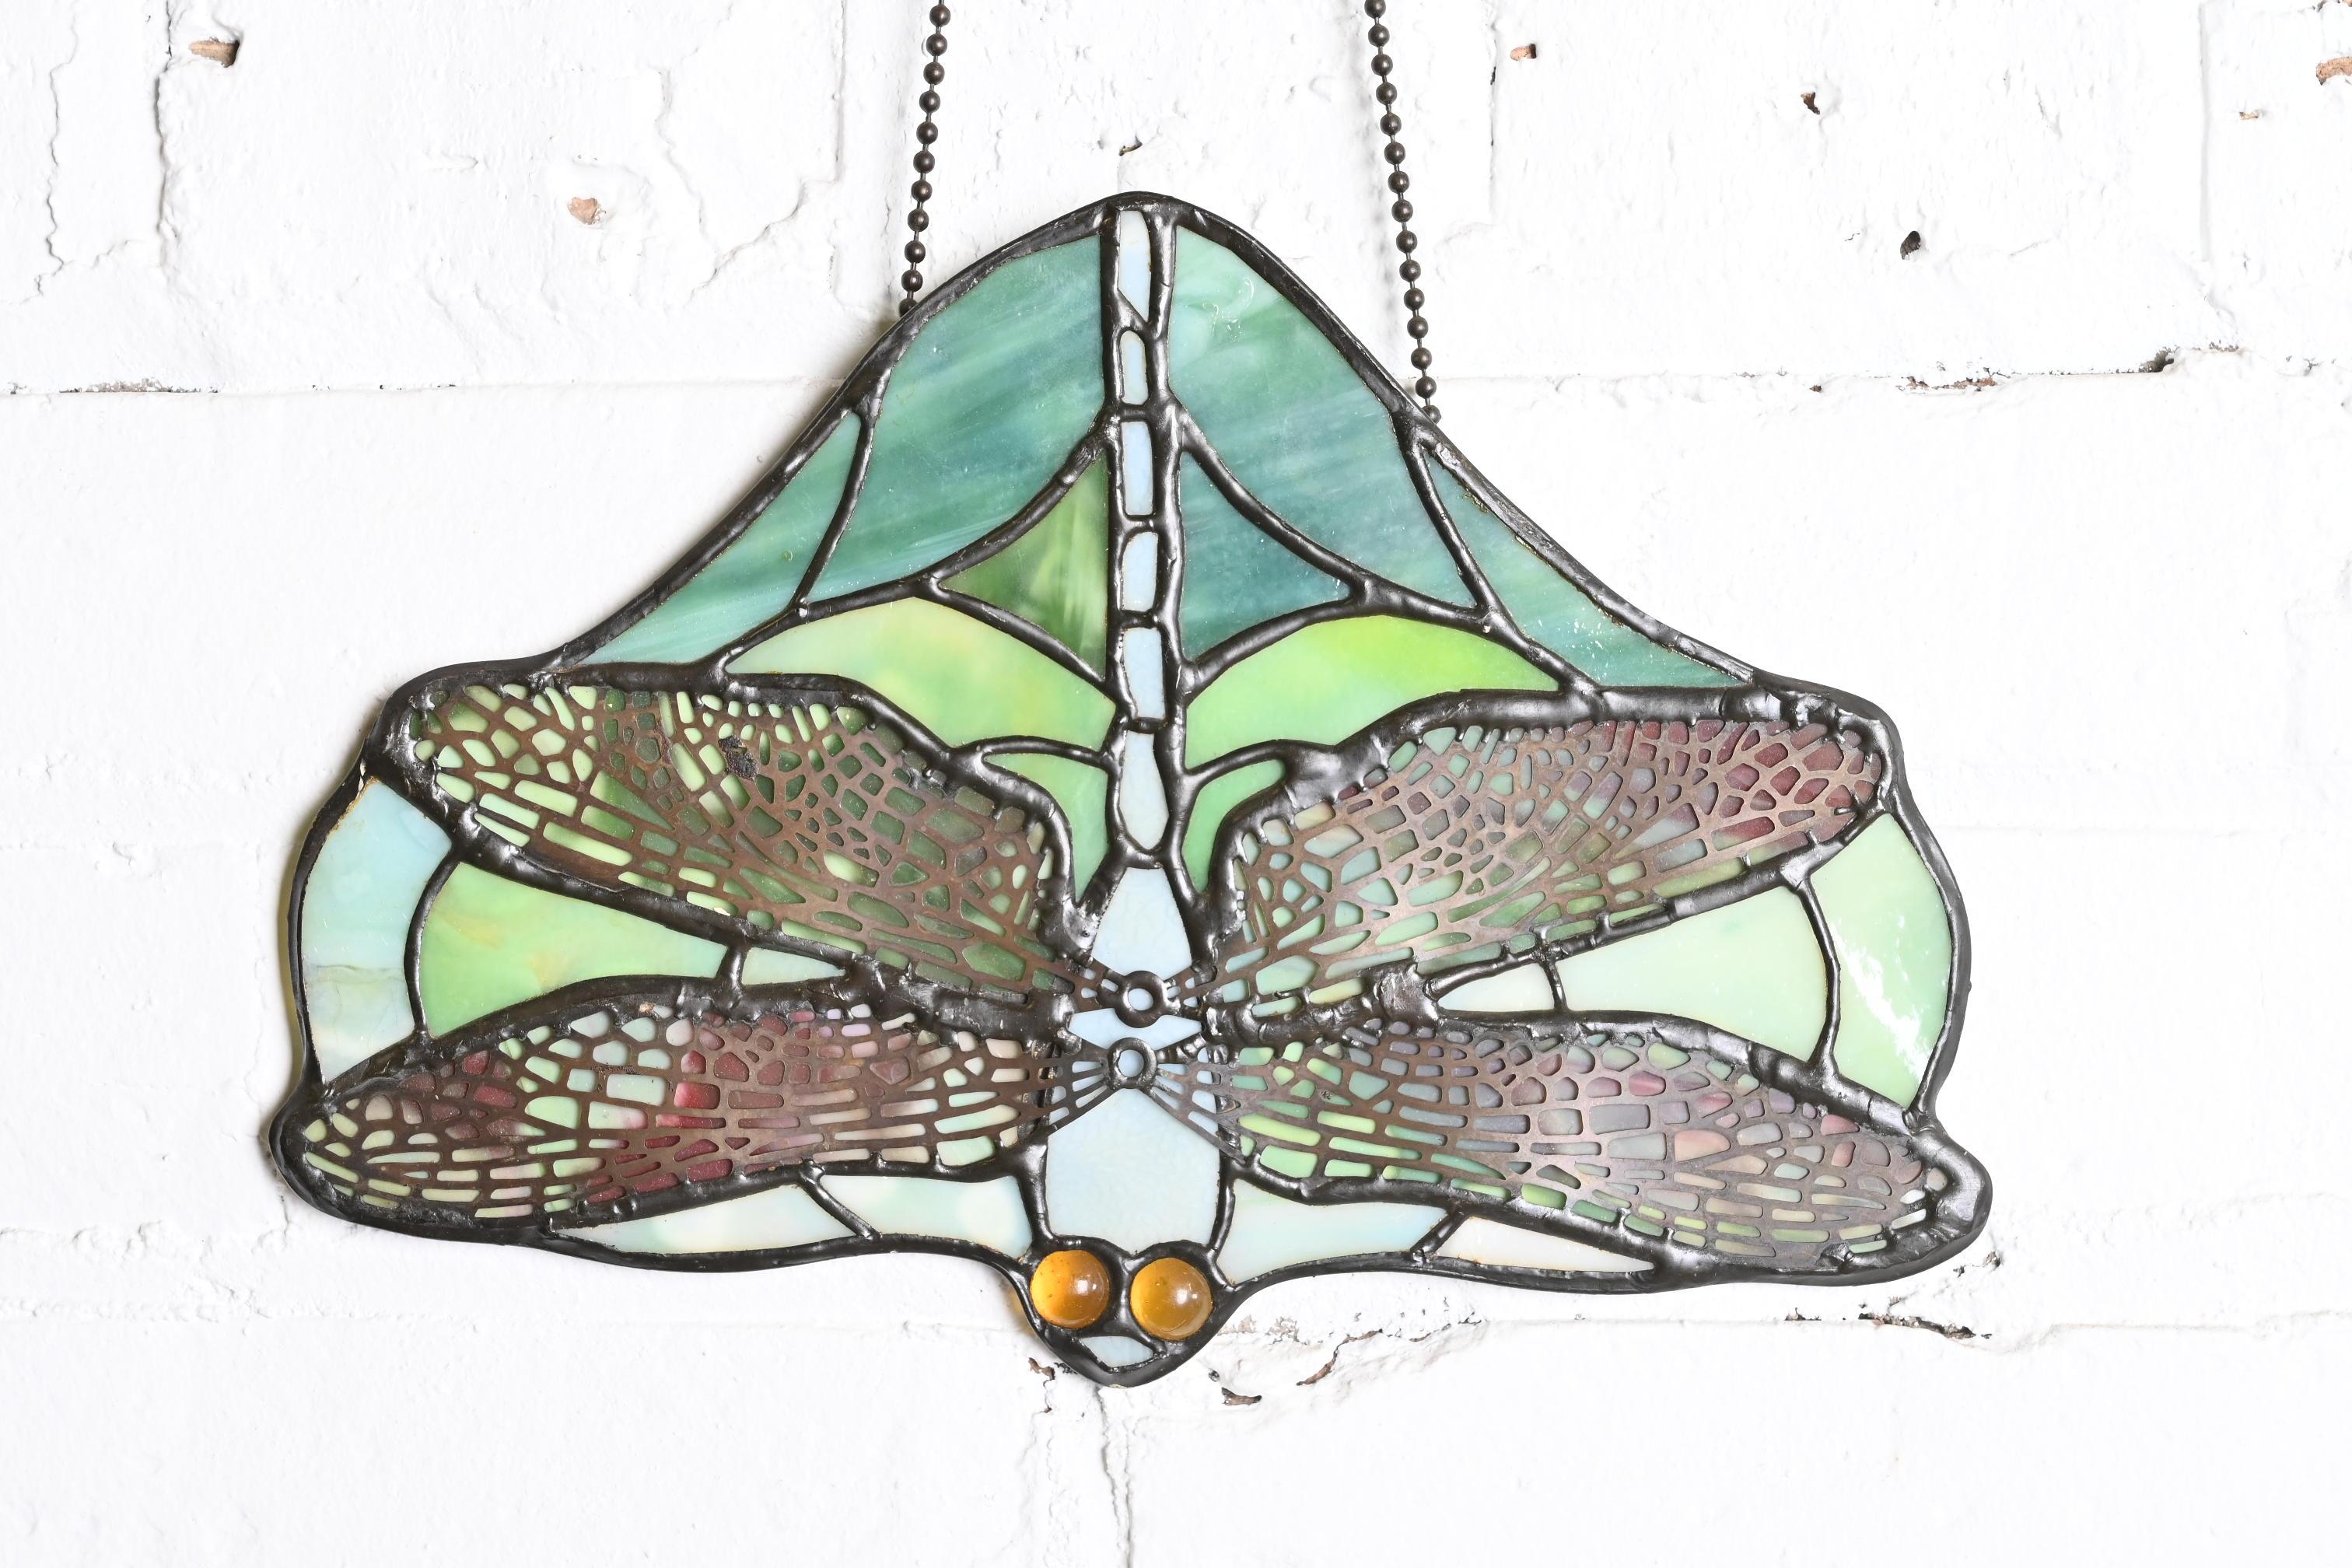 Arts and Crafts Arts & Crafts Dragonfly Stained Glass Lamp Screen Pendant After Tiffany Studios